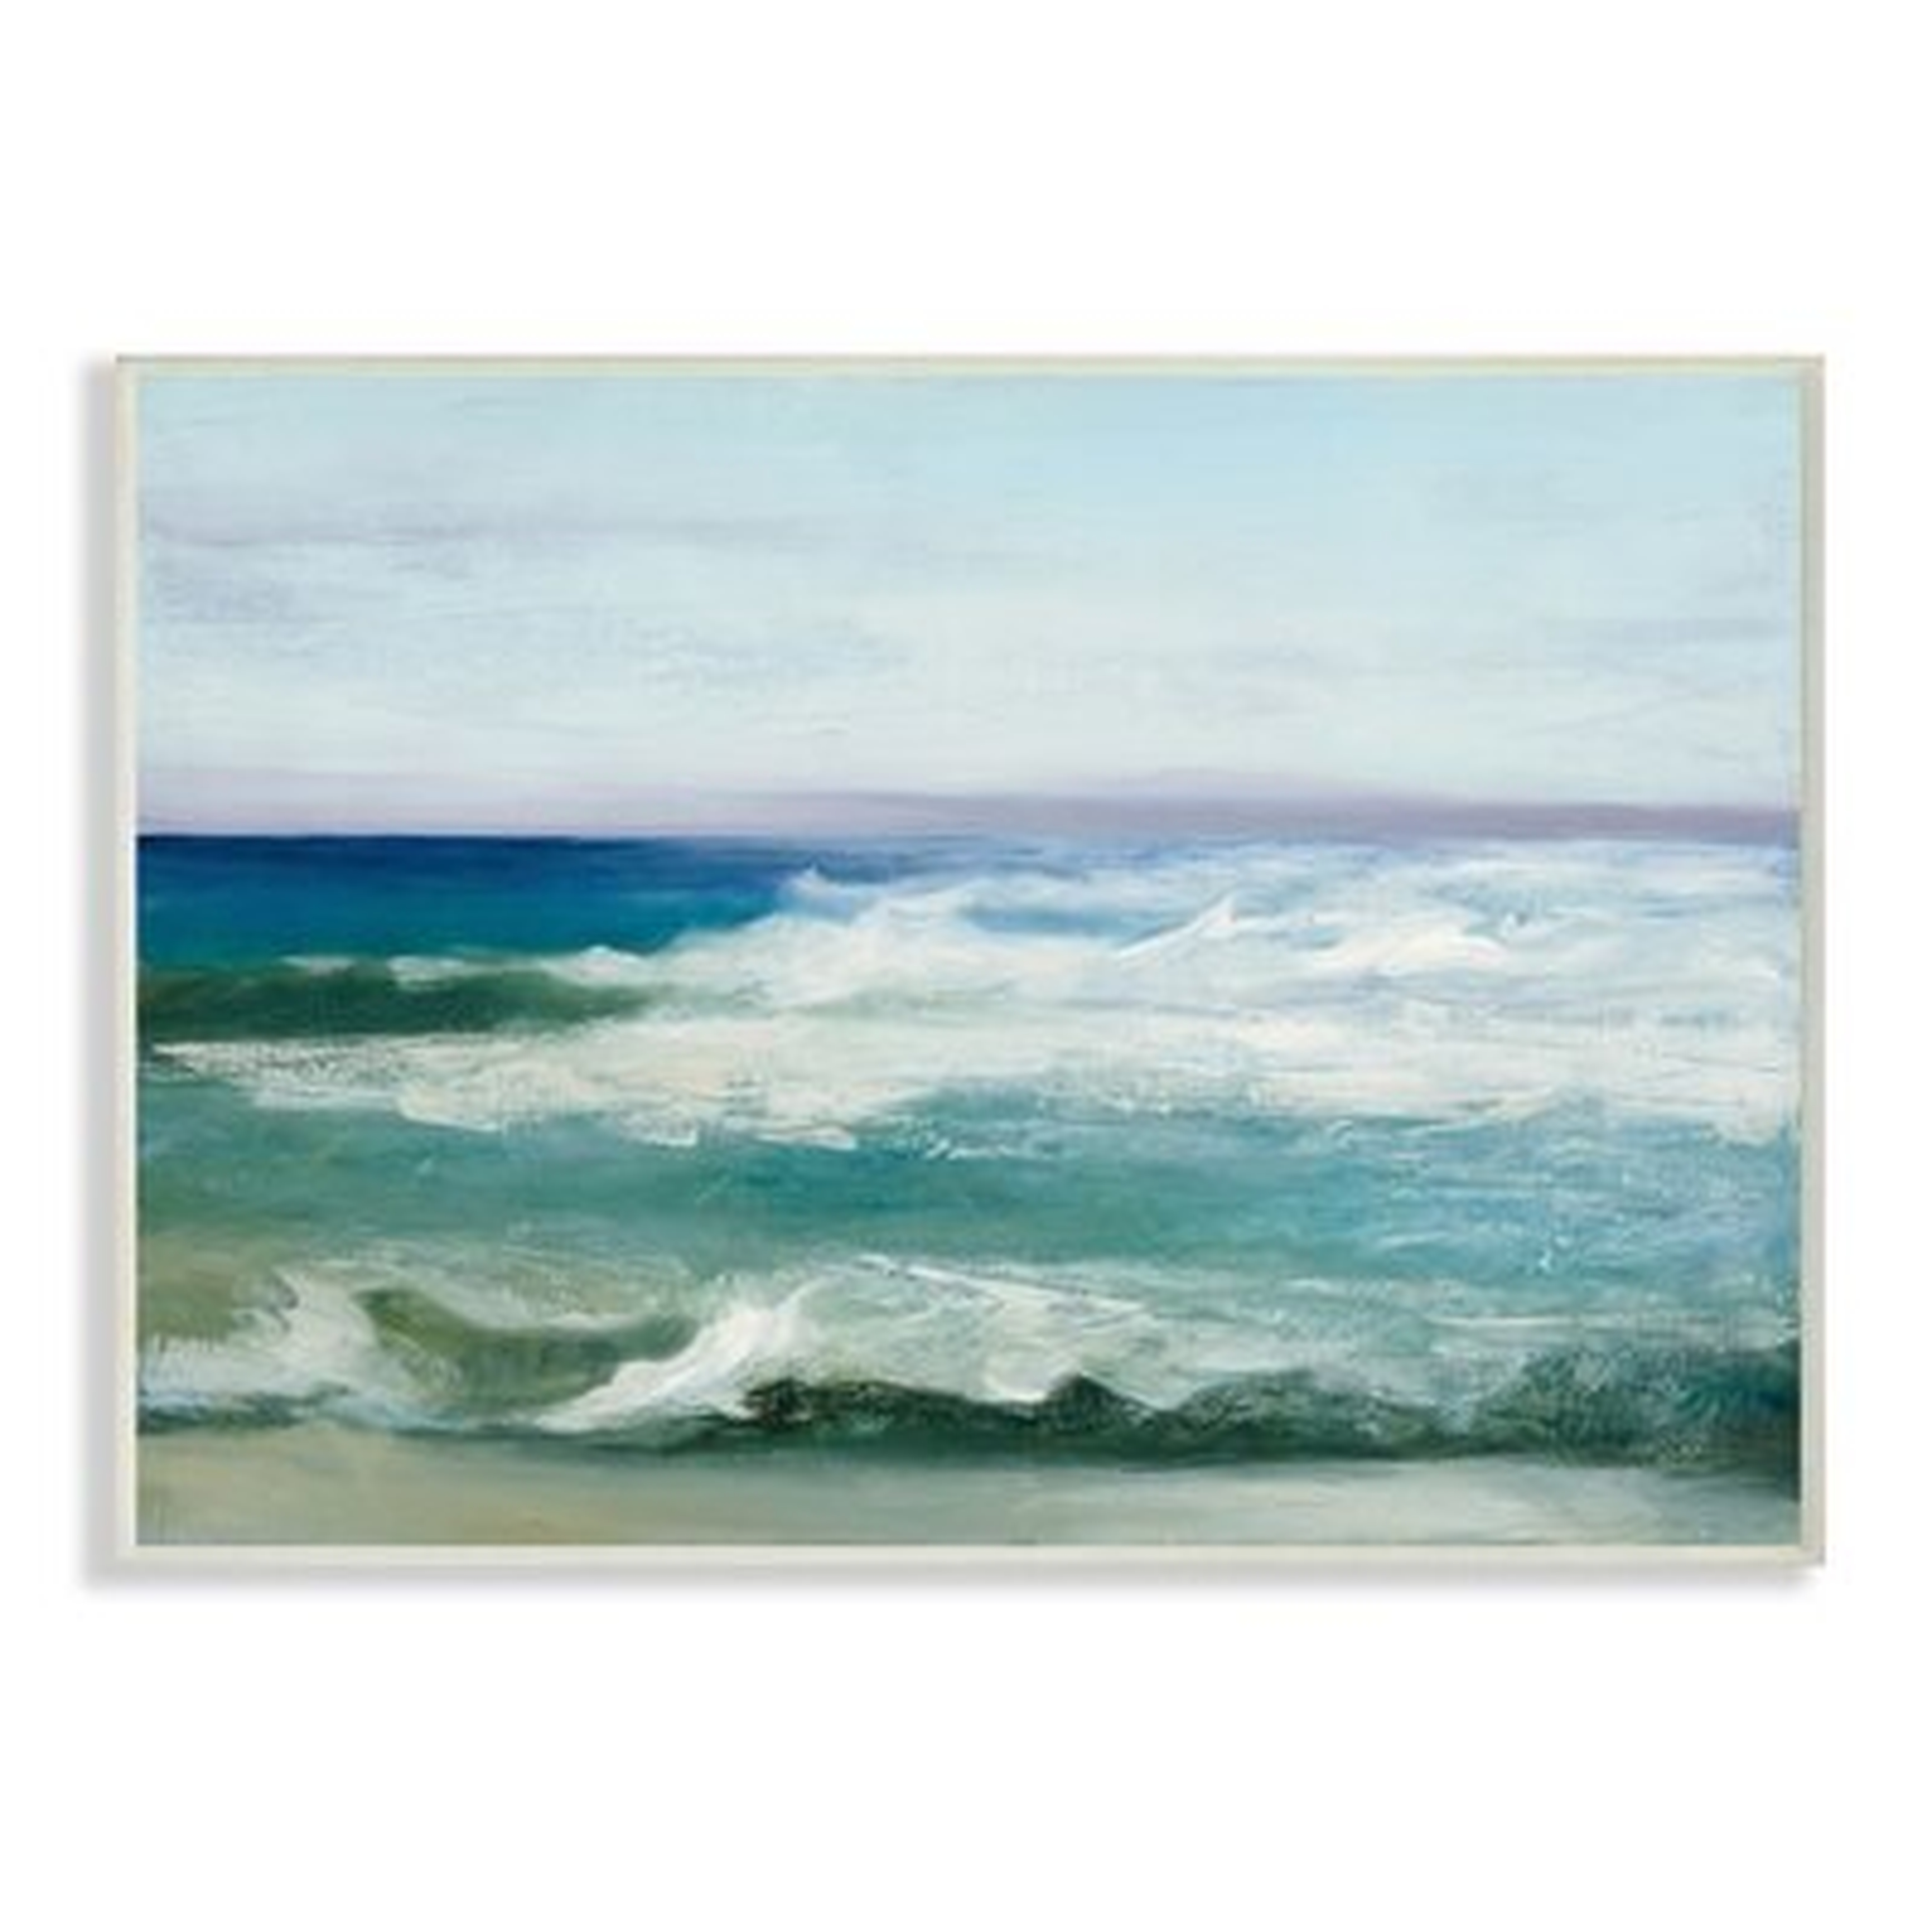 Abstract Waves Crashing Nautical Seascape Painting Abstract Waves Crashing Nautical Seascape Painting by Design By Julia Purinton - Graphic Art - Wayfair